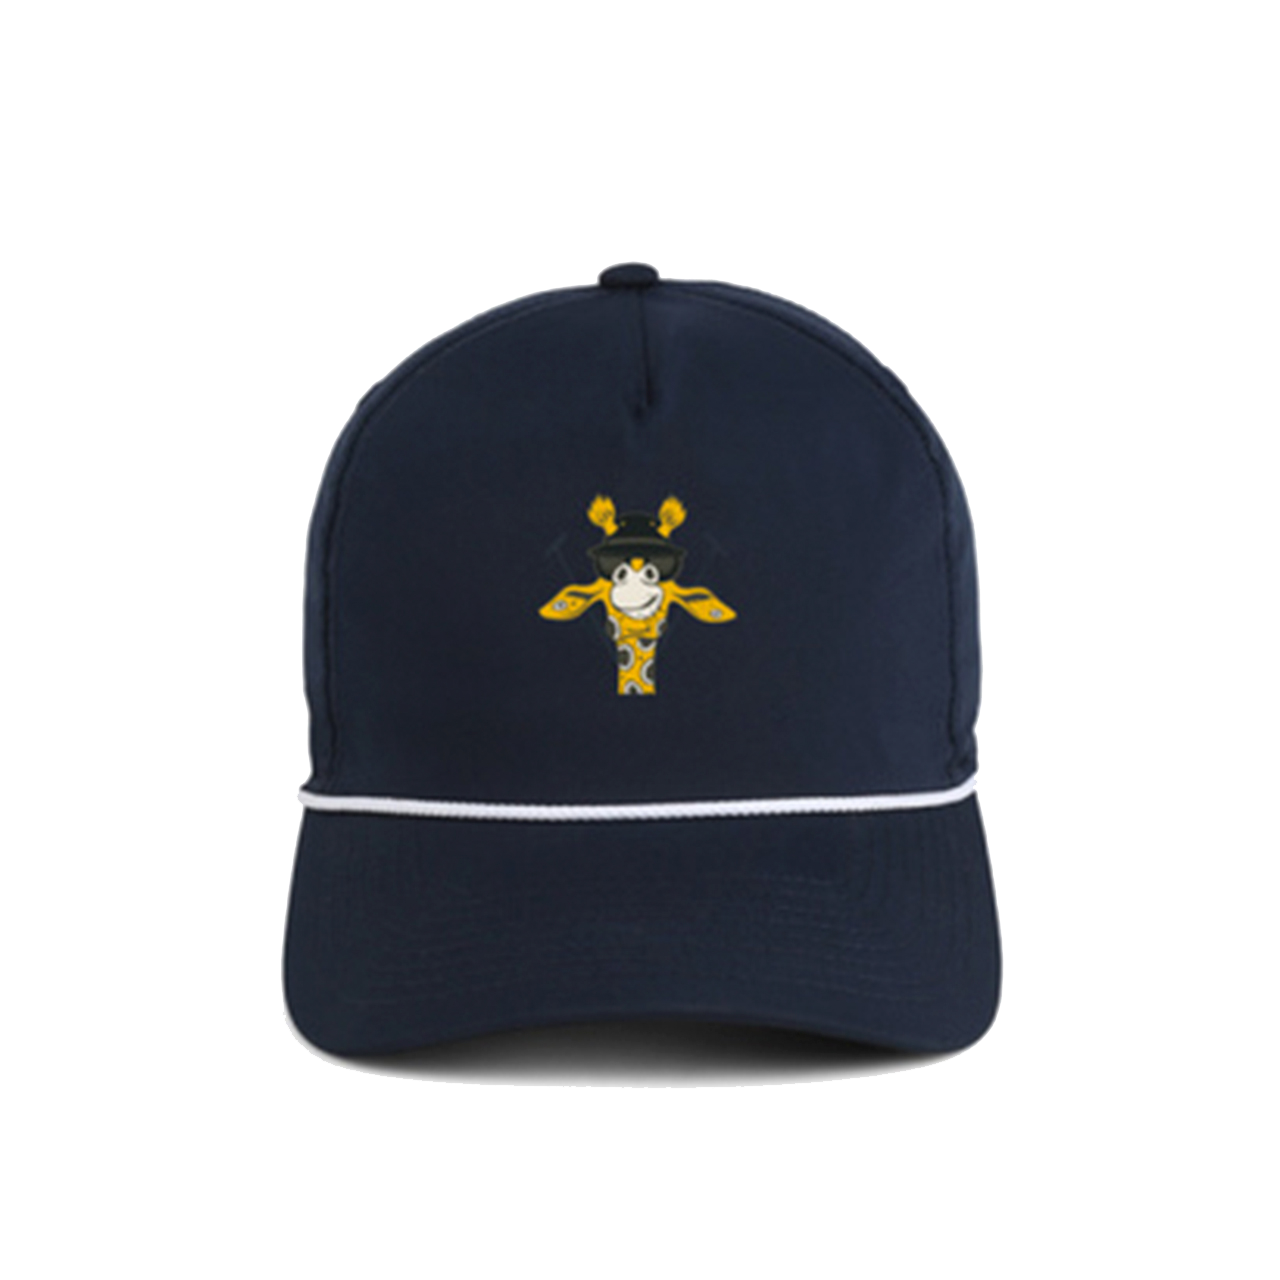 Mr. Polo Rope Hat x Imperial